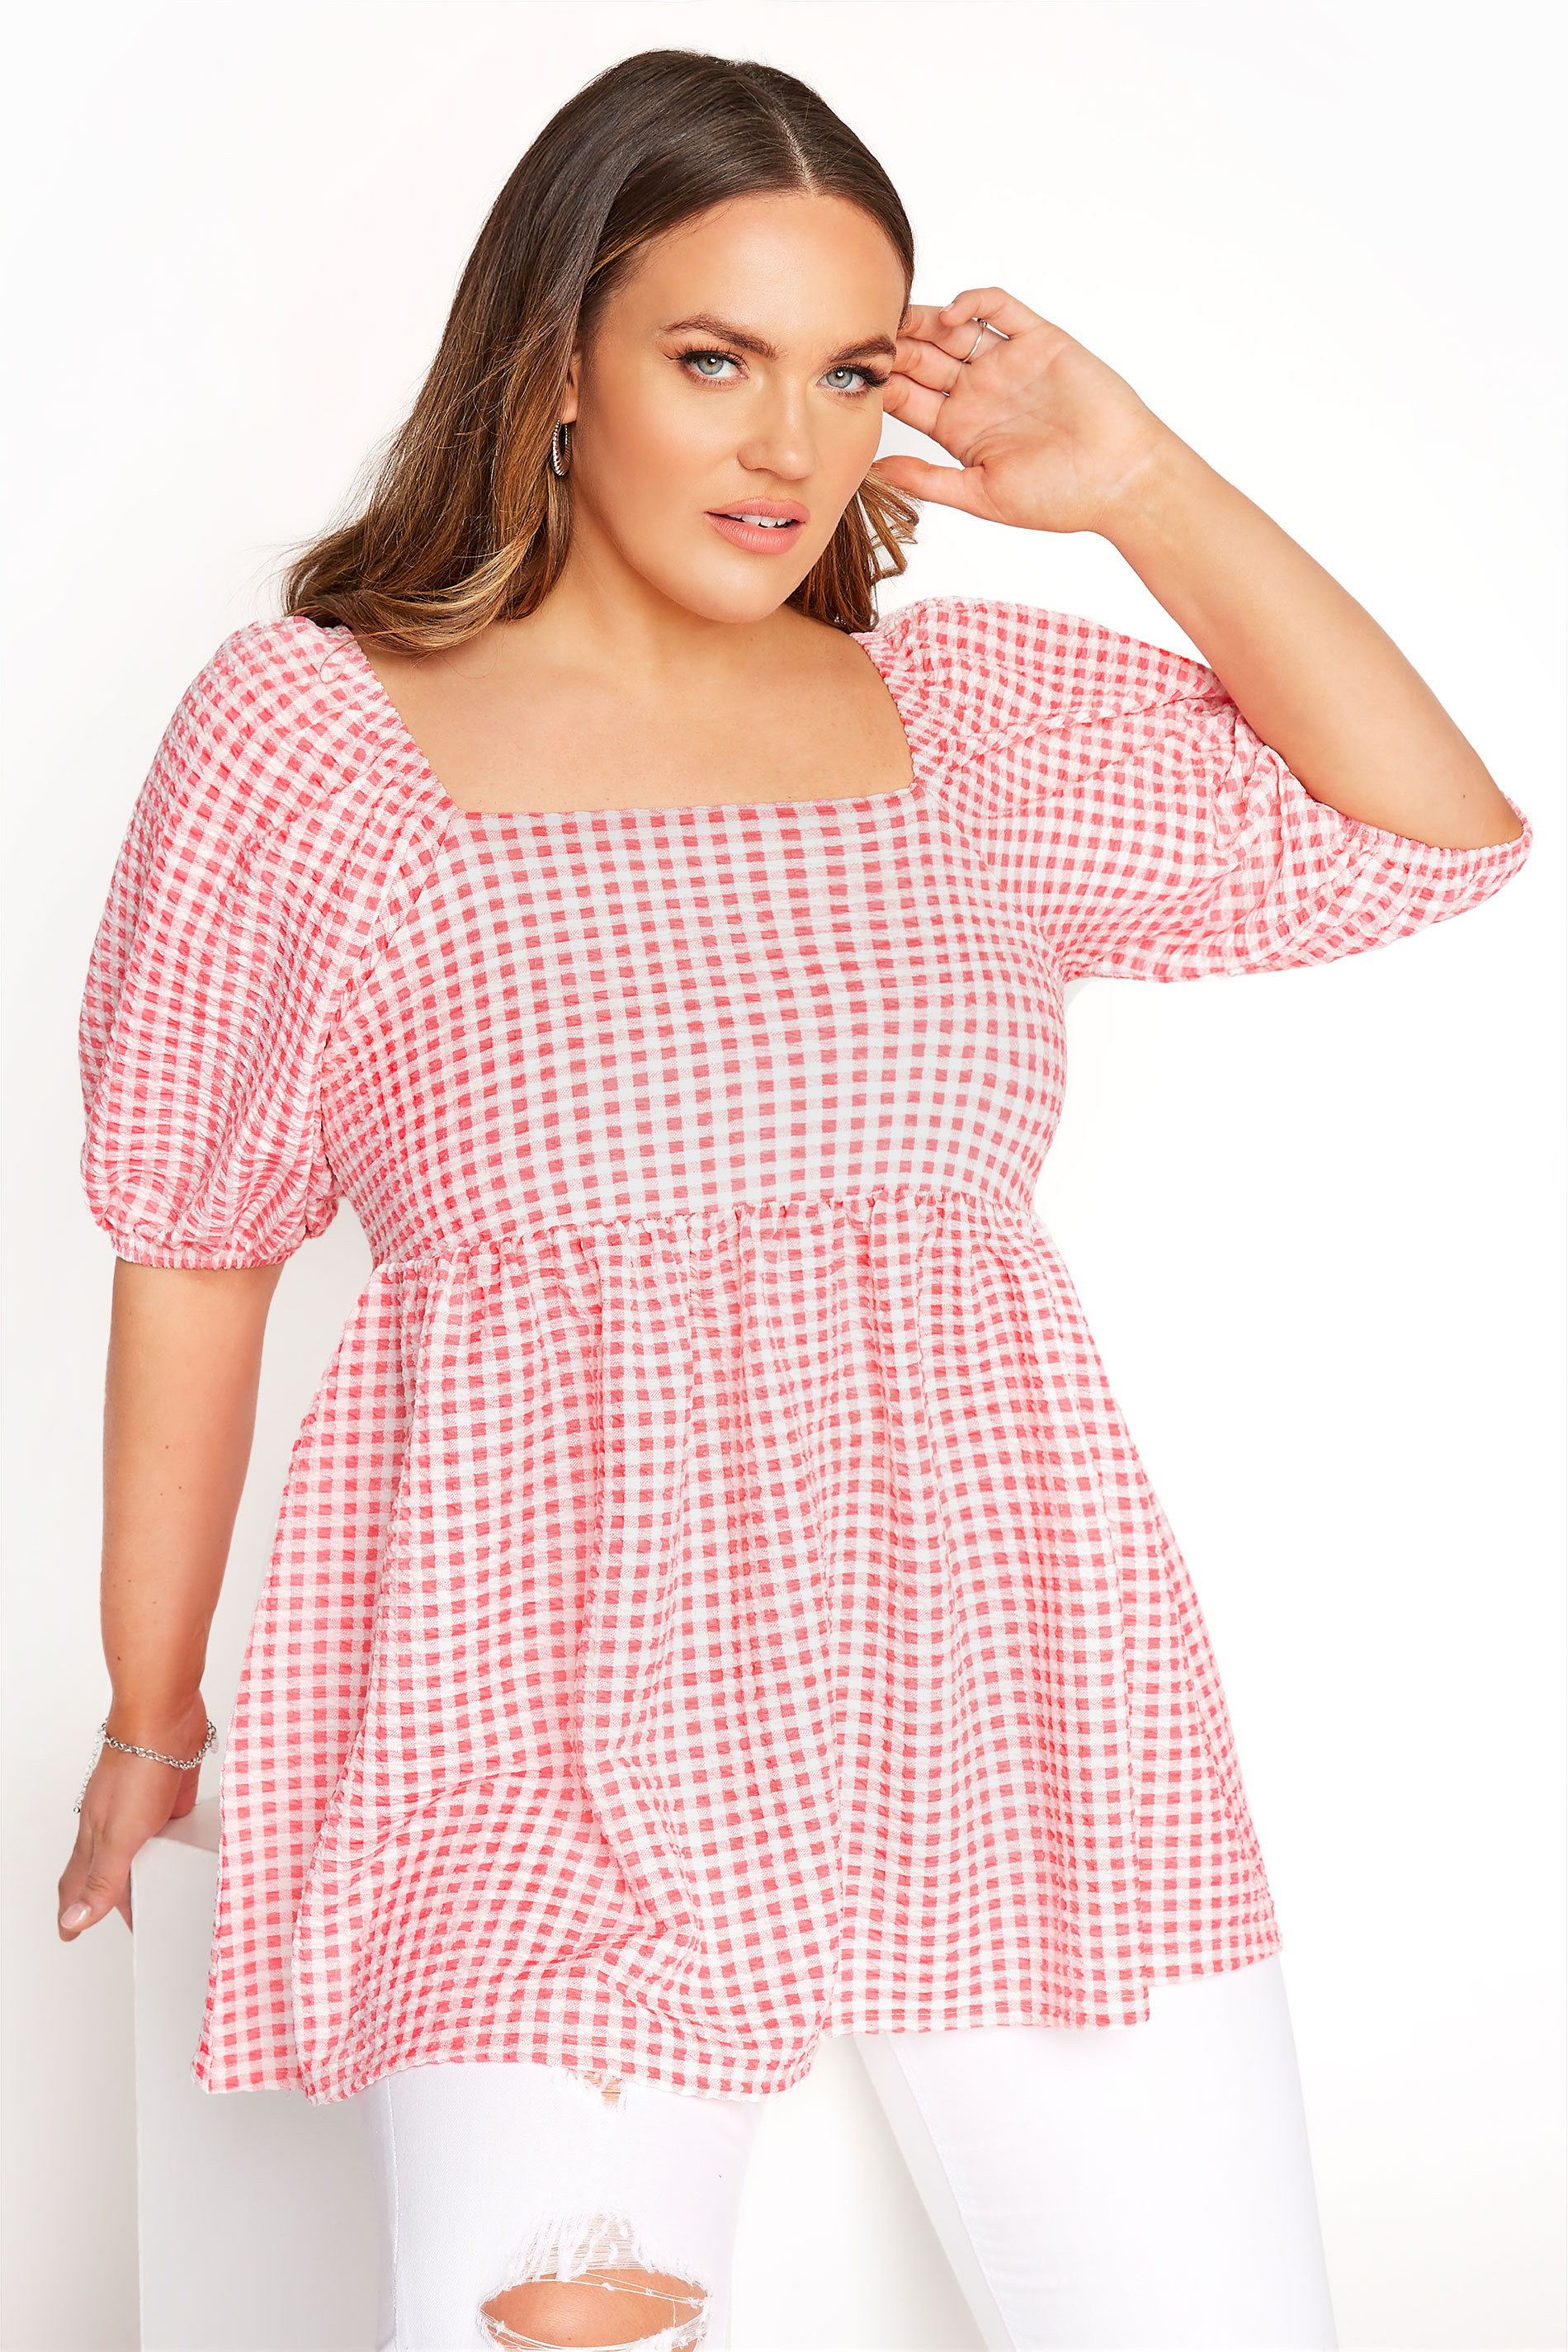 LIMITED COLLECTION Curve Coral Pink Gingham Milkmaid Top 1